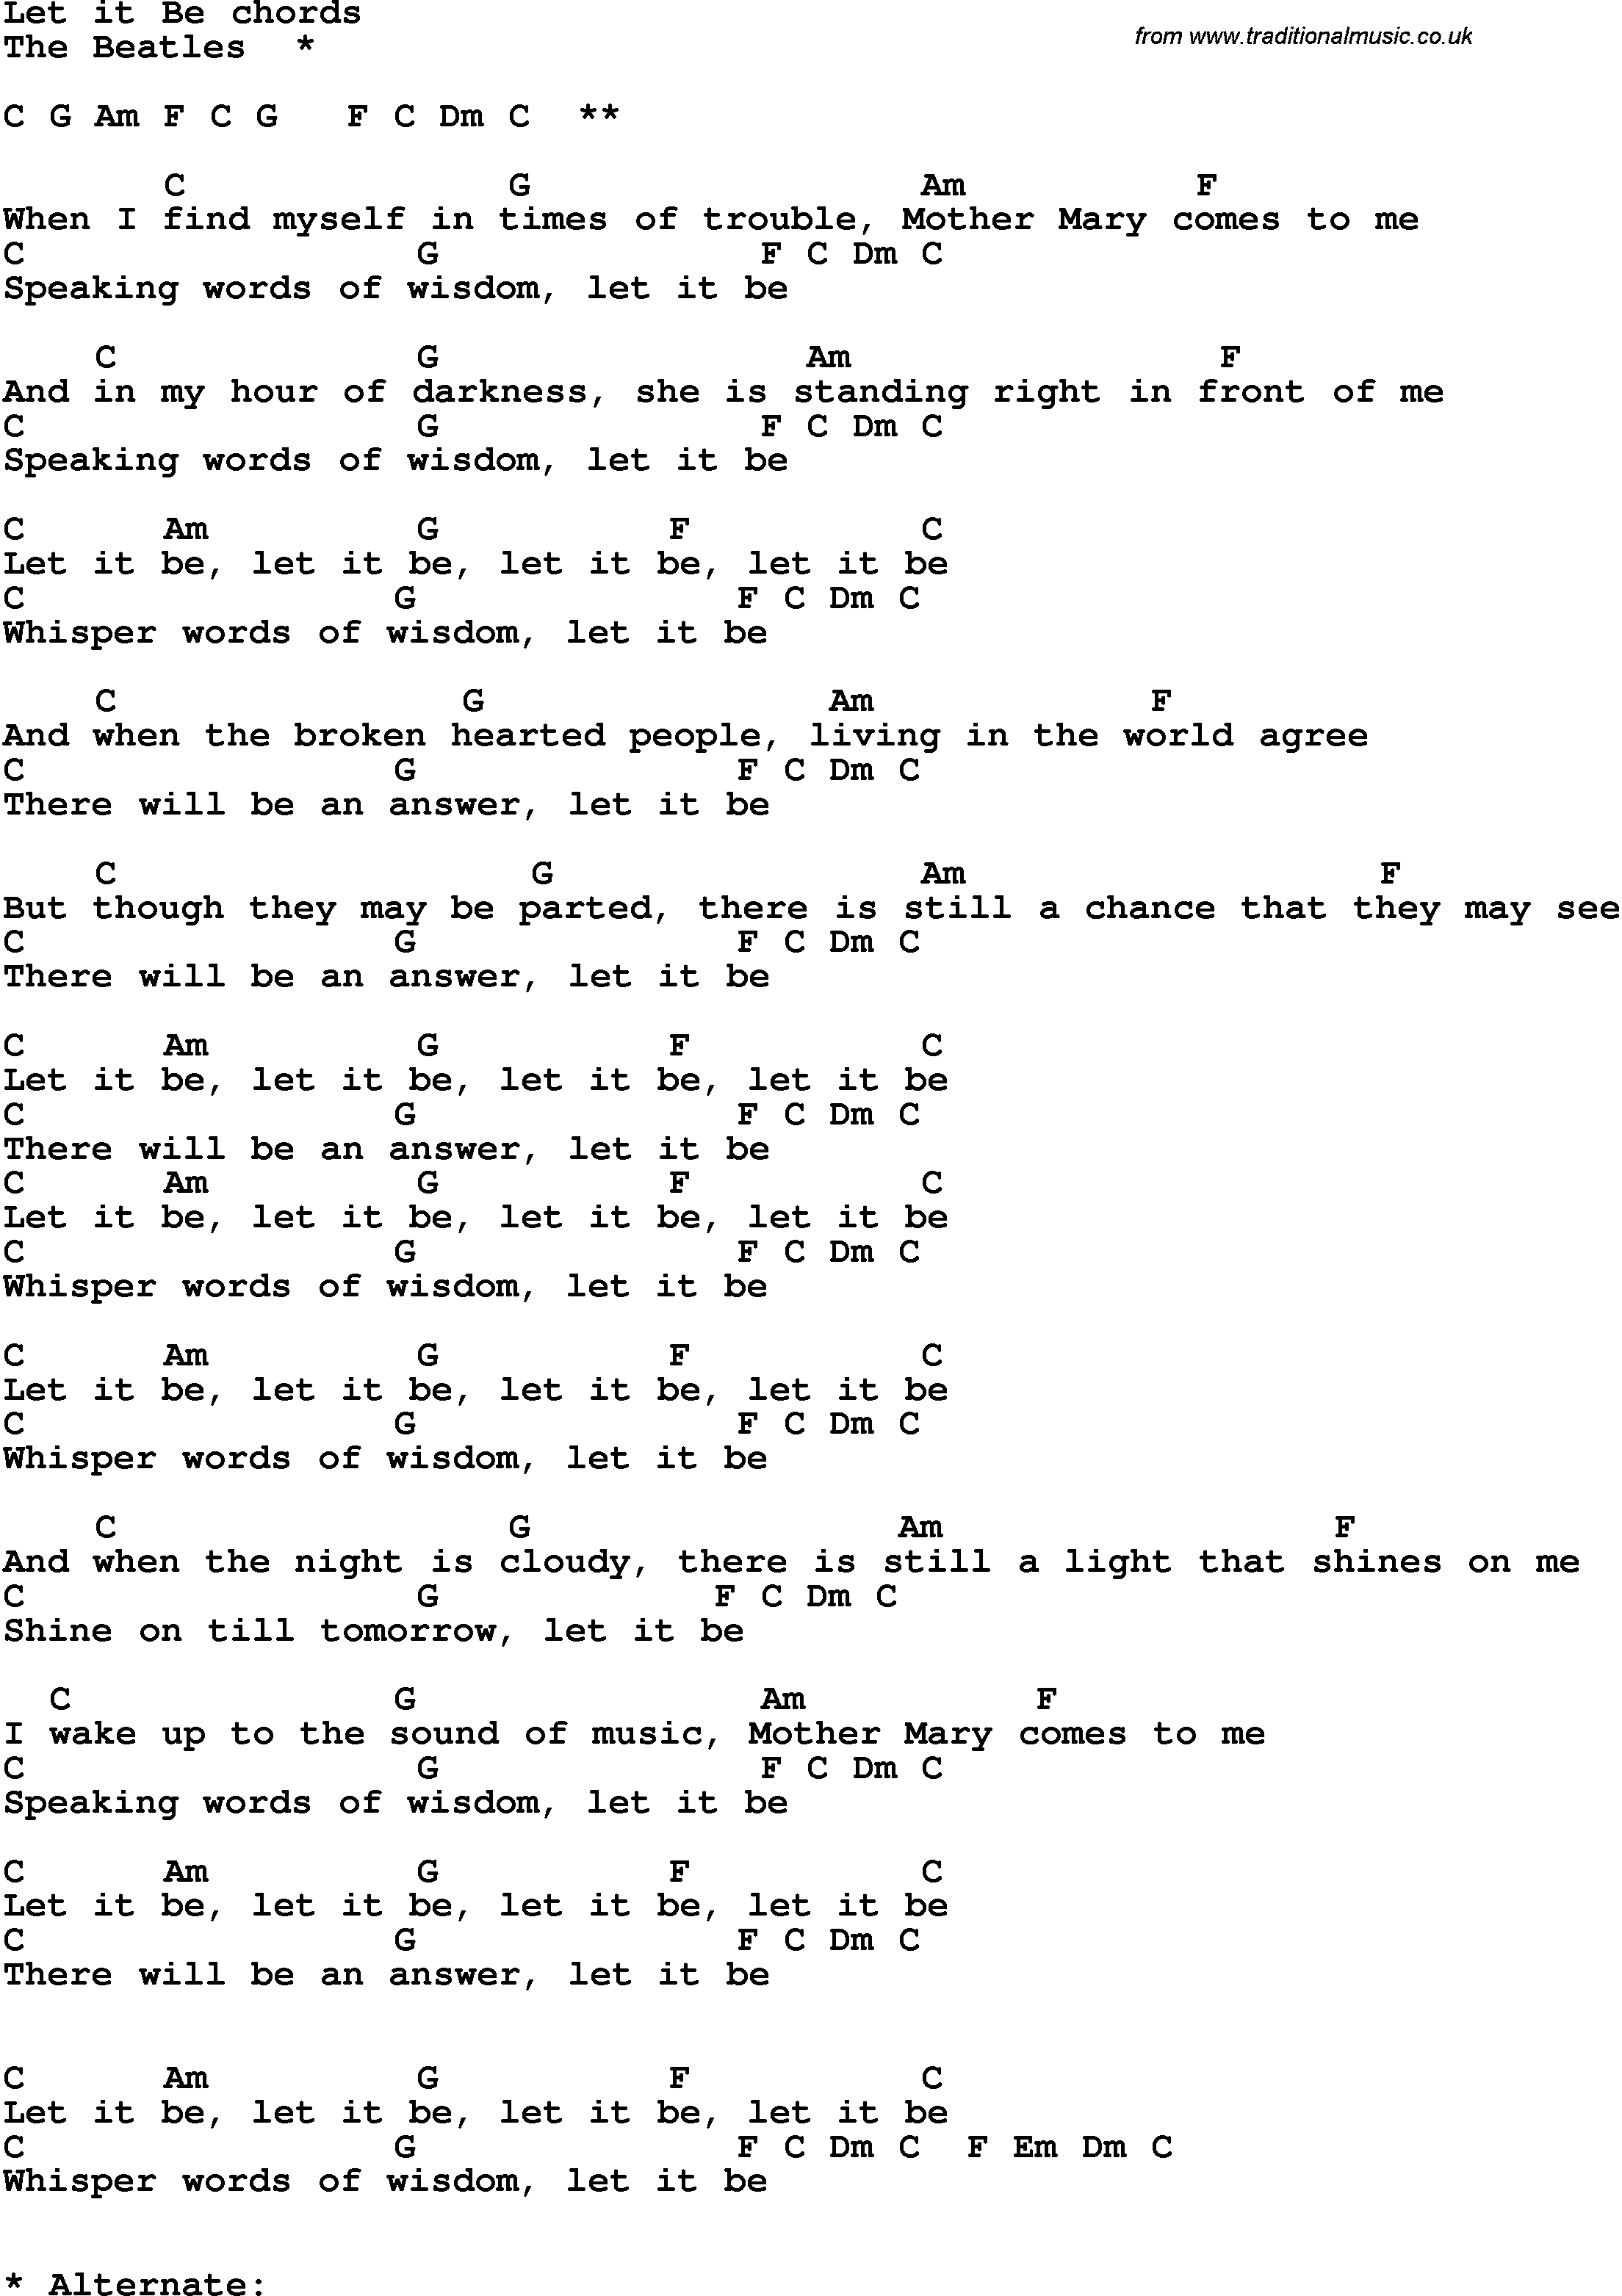 Let It Be Chords Song Lyrics With Guitar Chords For Let It Be The Beatles